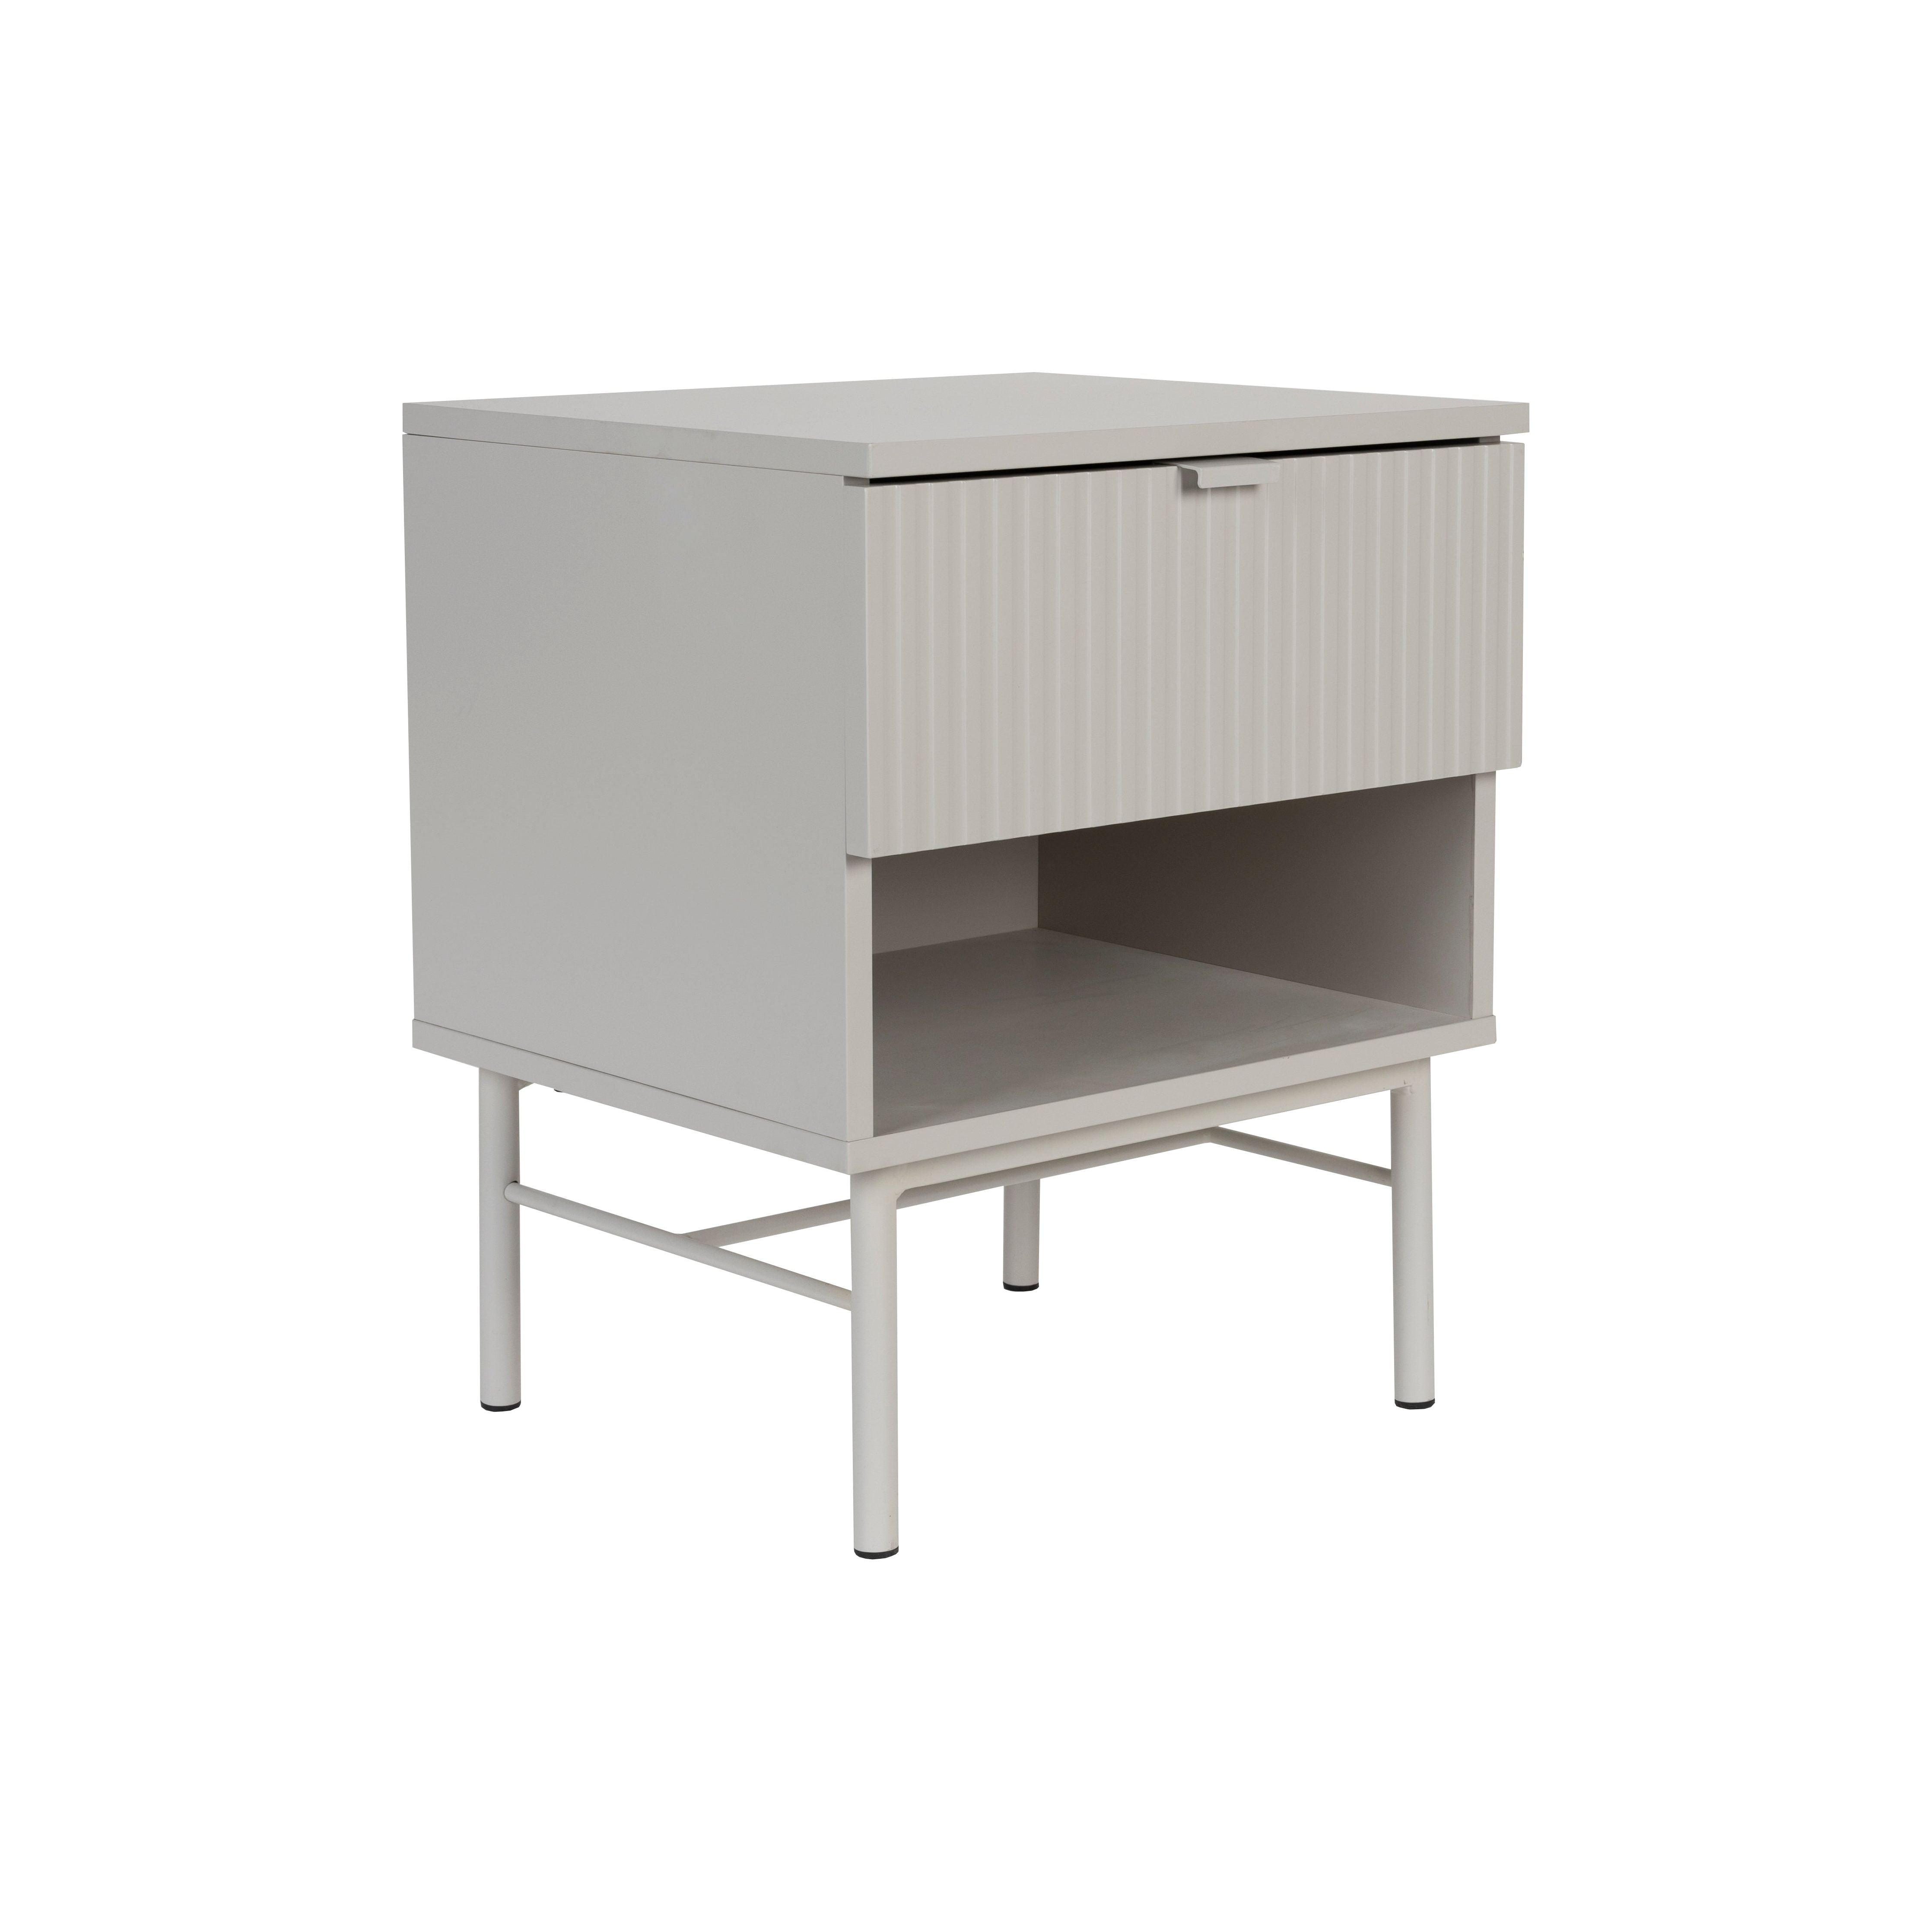 Sidetable/ bed stand cayo